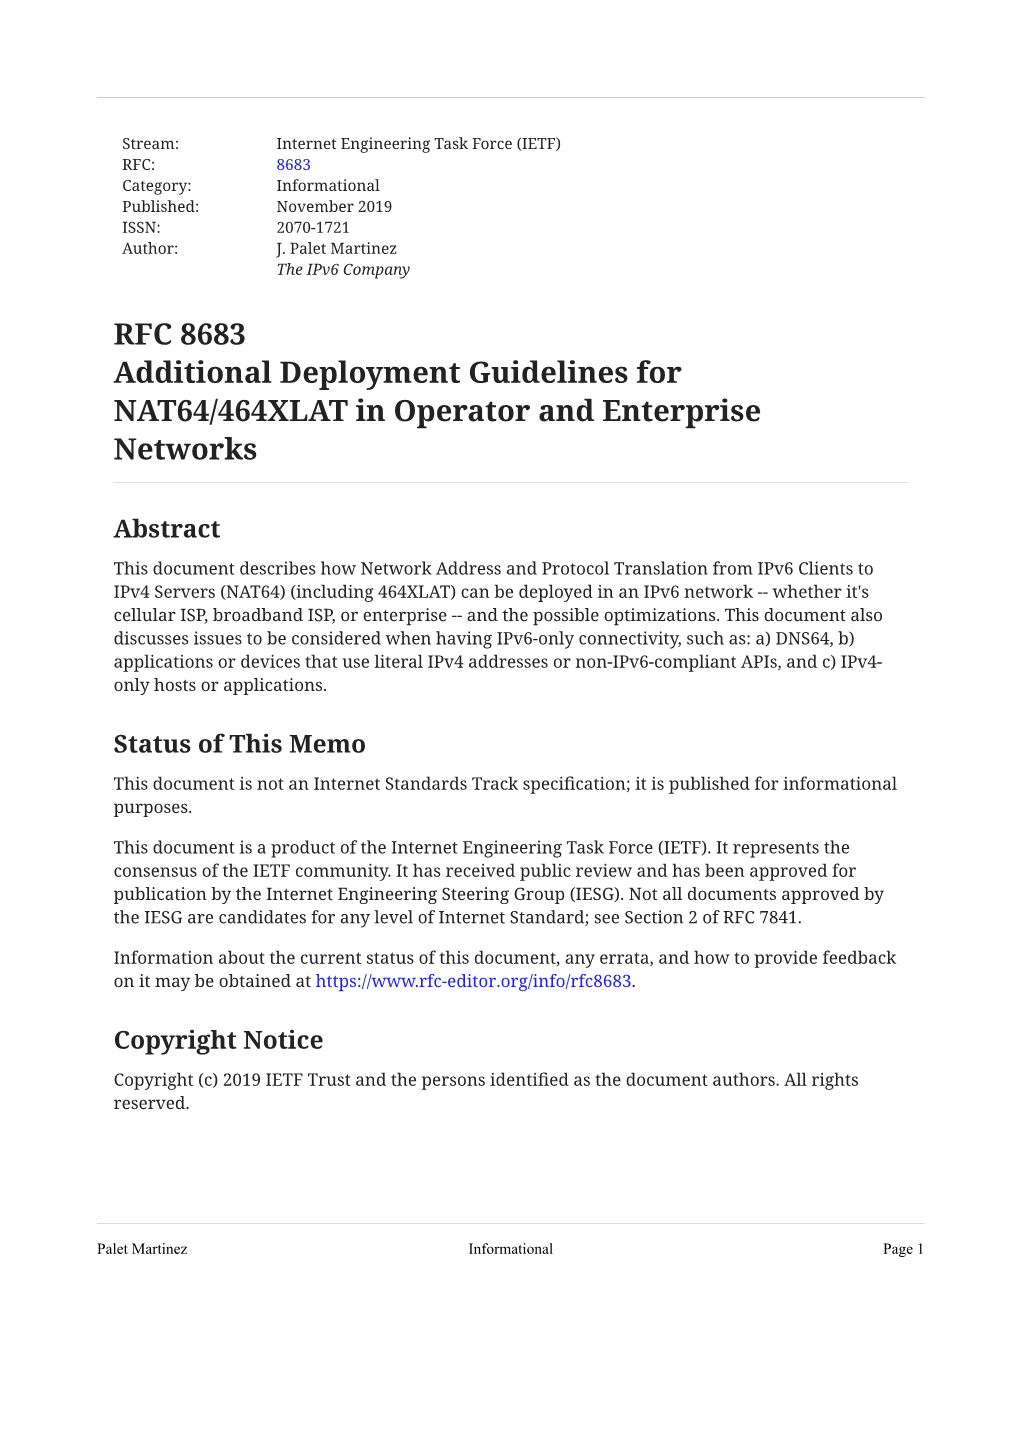 RFC 8683: Additional Deployment Guidelines for NAT64/464XLAT In